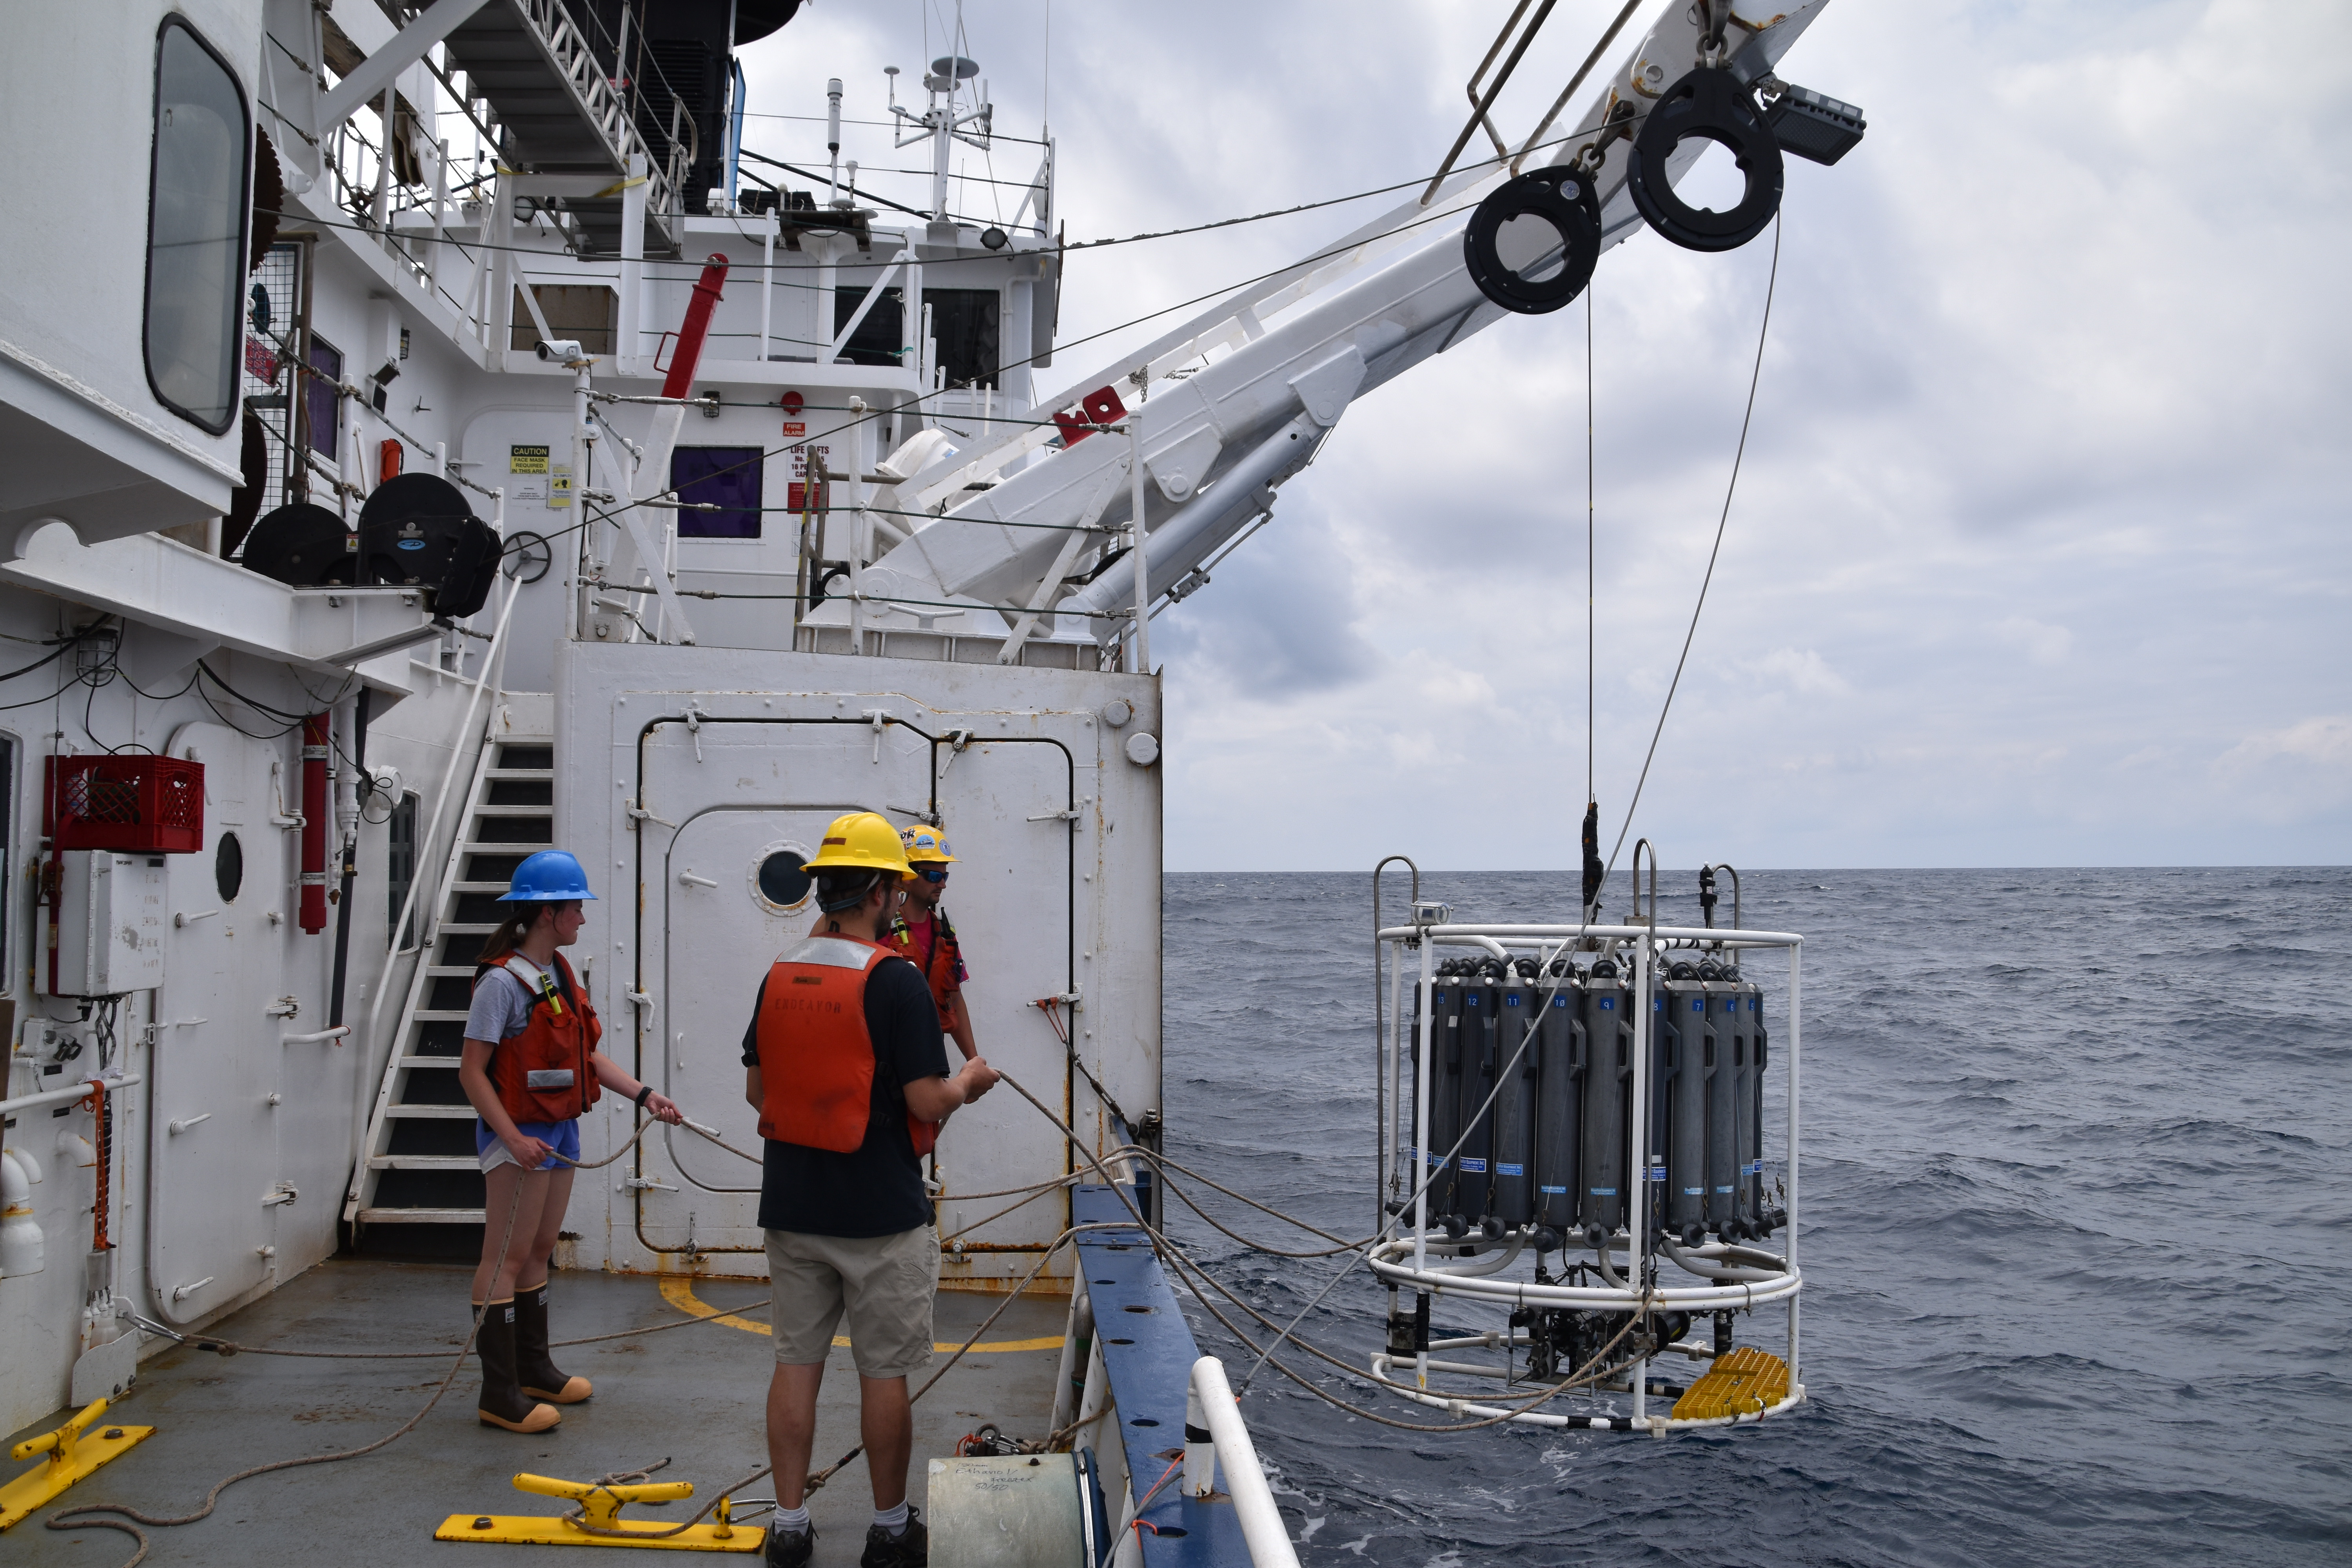 Collecting ocean water from a CTD rosette off the side of the R/V Endeavor research cruise ship in the Atlantic Ocean Northeast shelf.